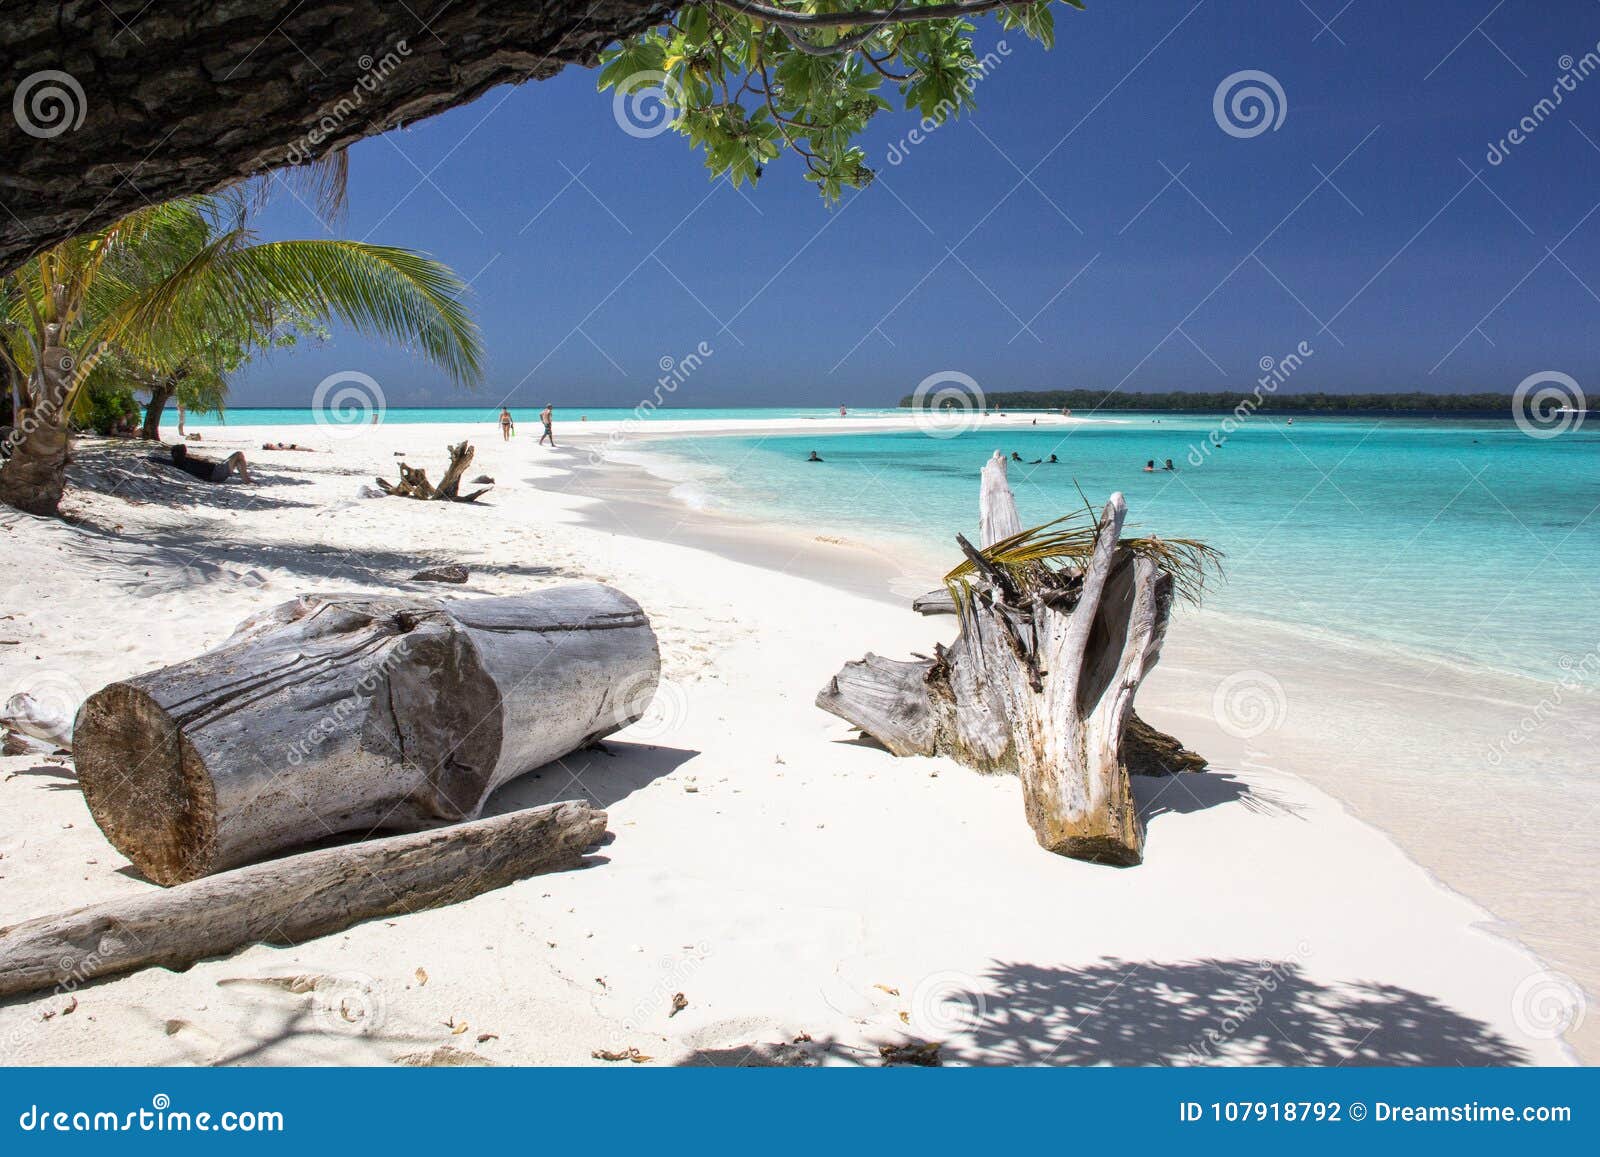 beautiful beach with pristine turquoise water in conflict island, papua new guinea